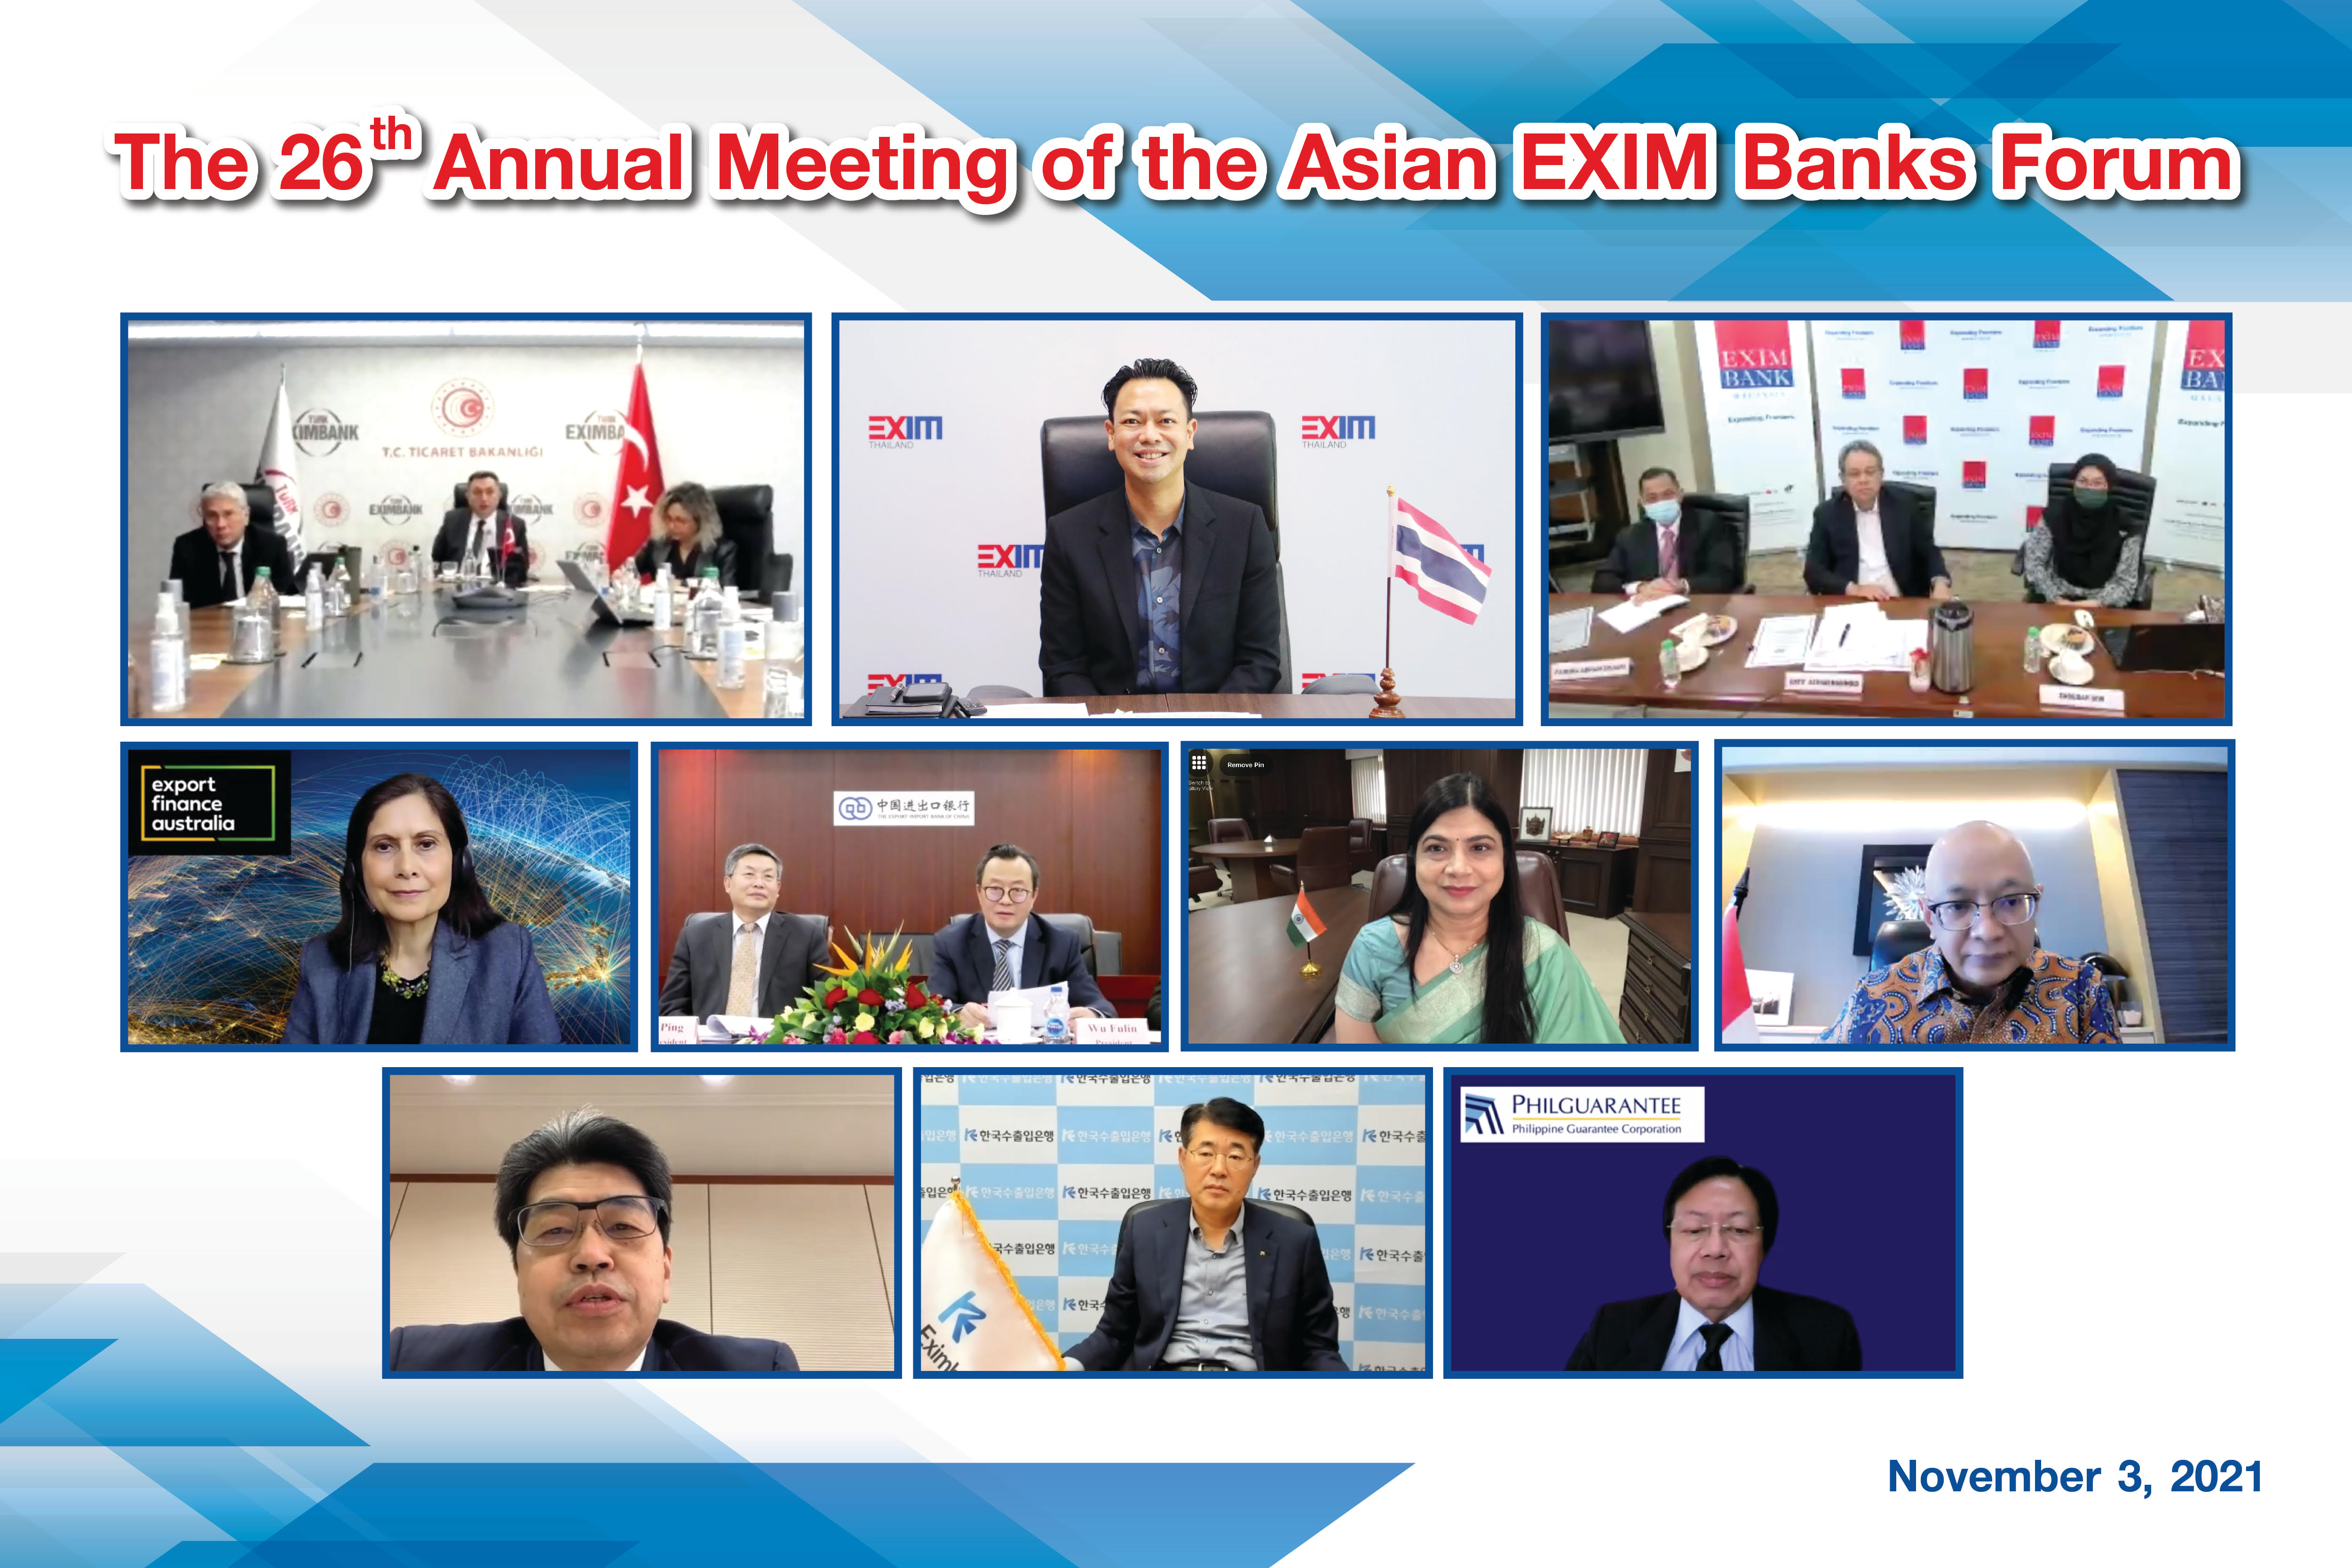 EXIM Thailand Joins the 26th Annual Meeting of Asian EXIM Banks Forum